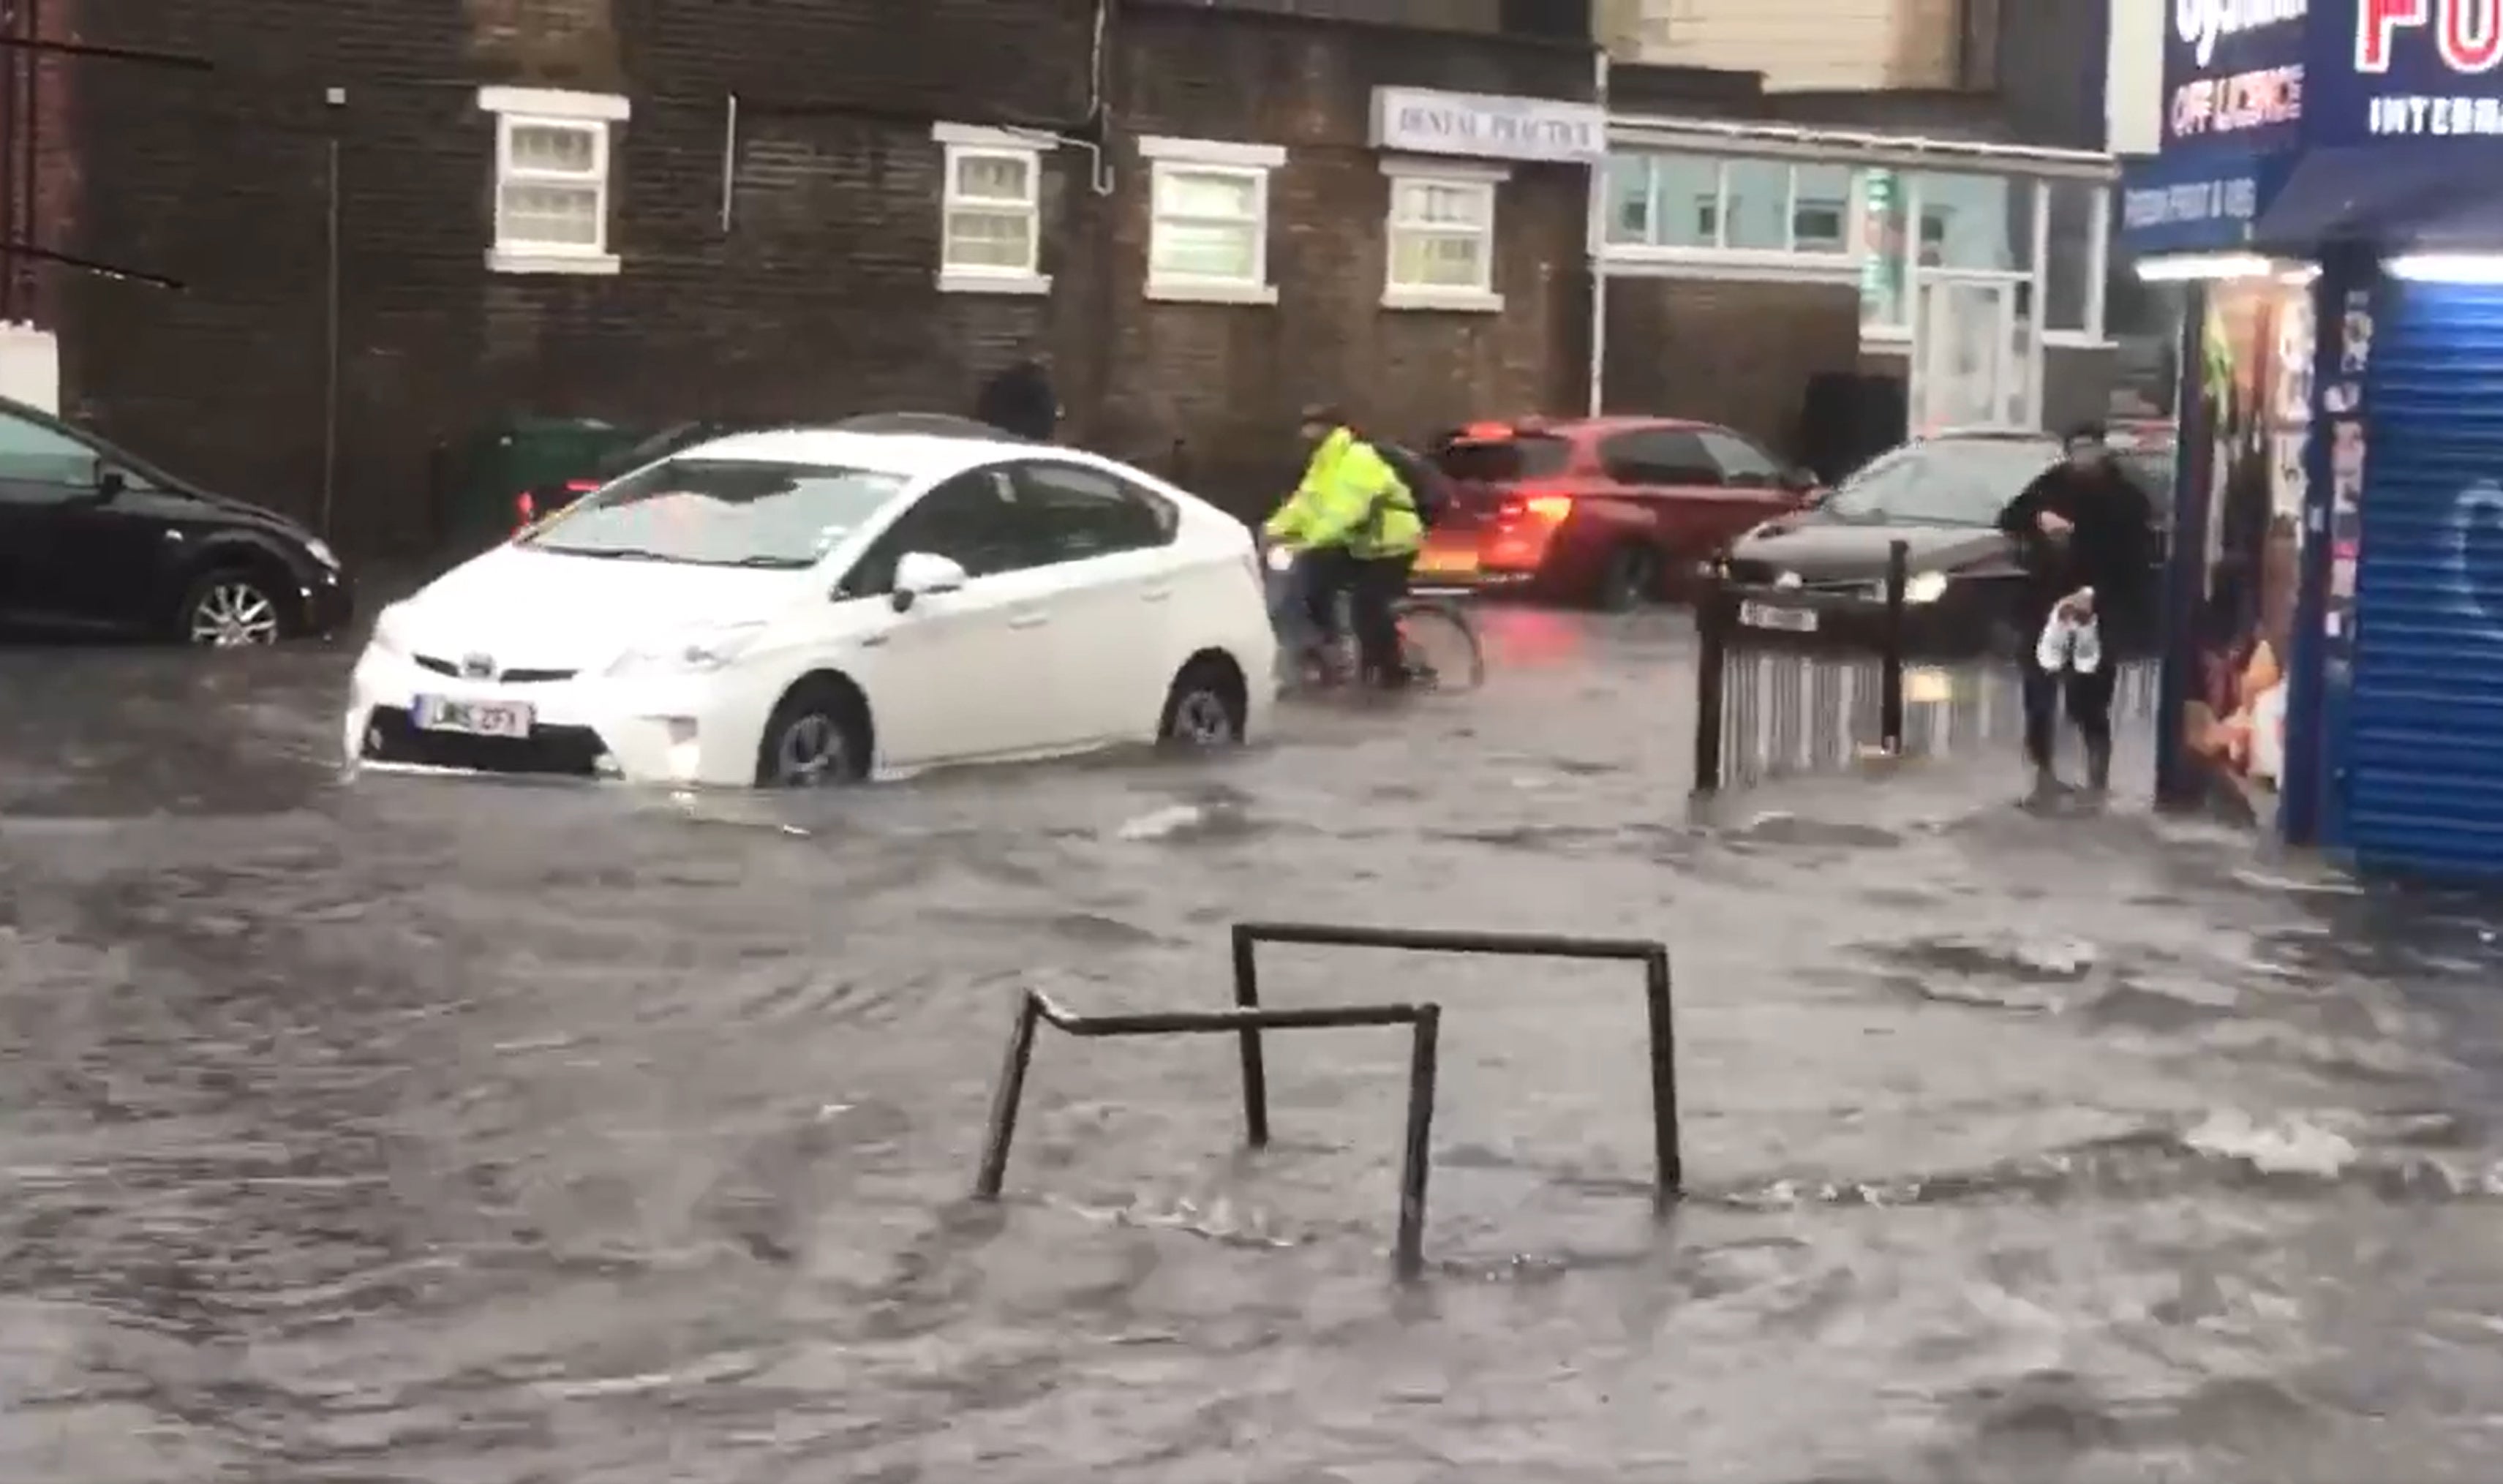 ‘Torrential downpours revisited London on Saturday – but people still drove through floodwaters’